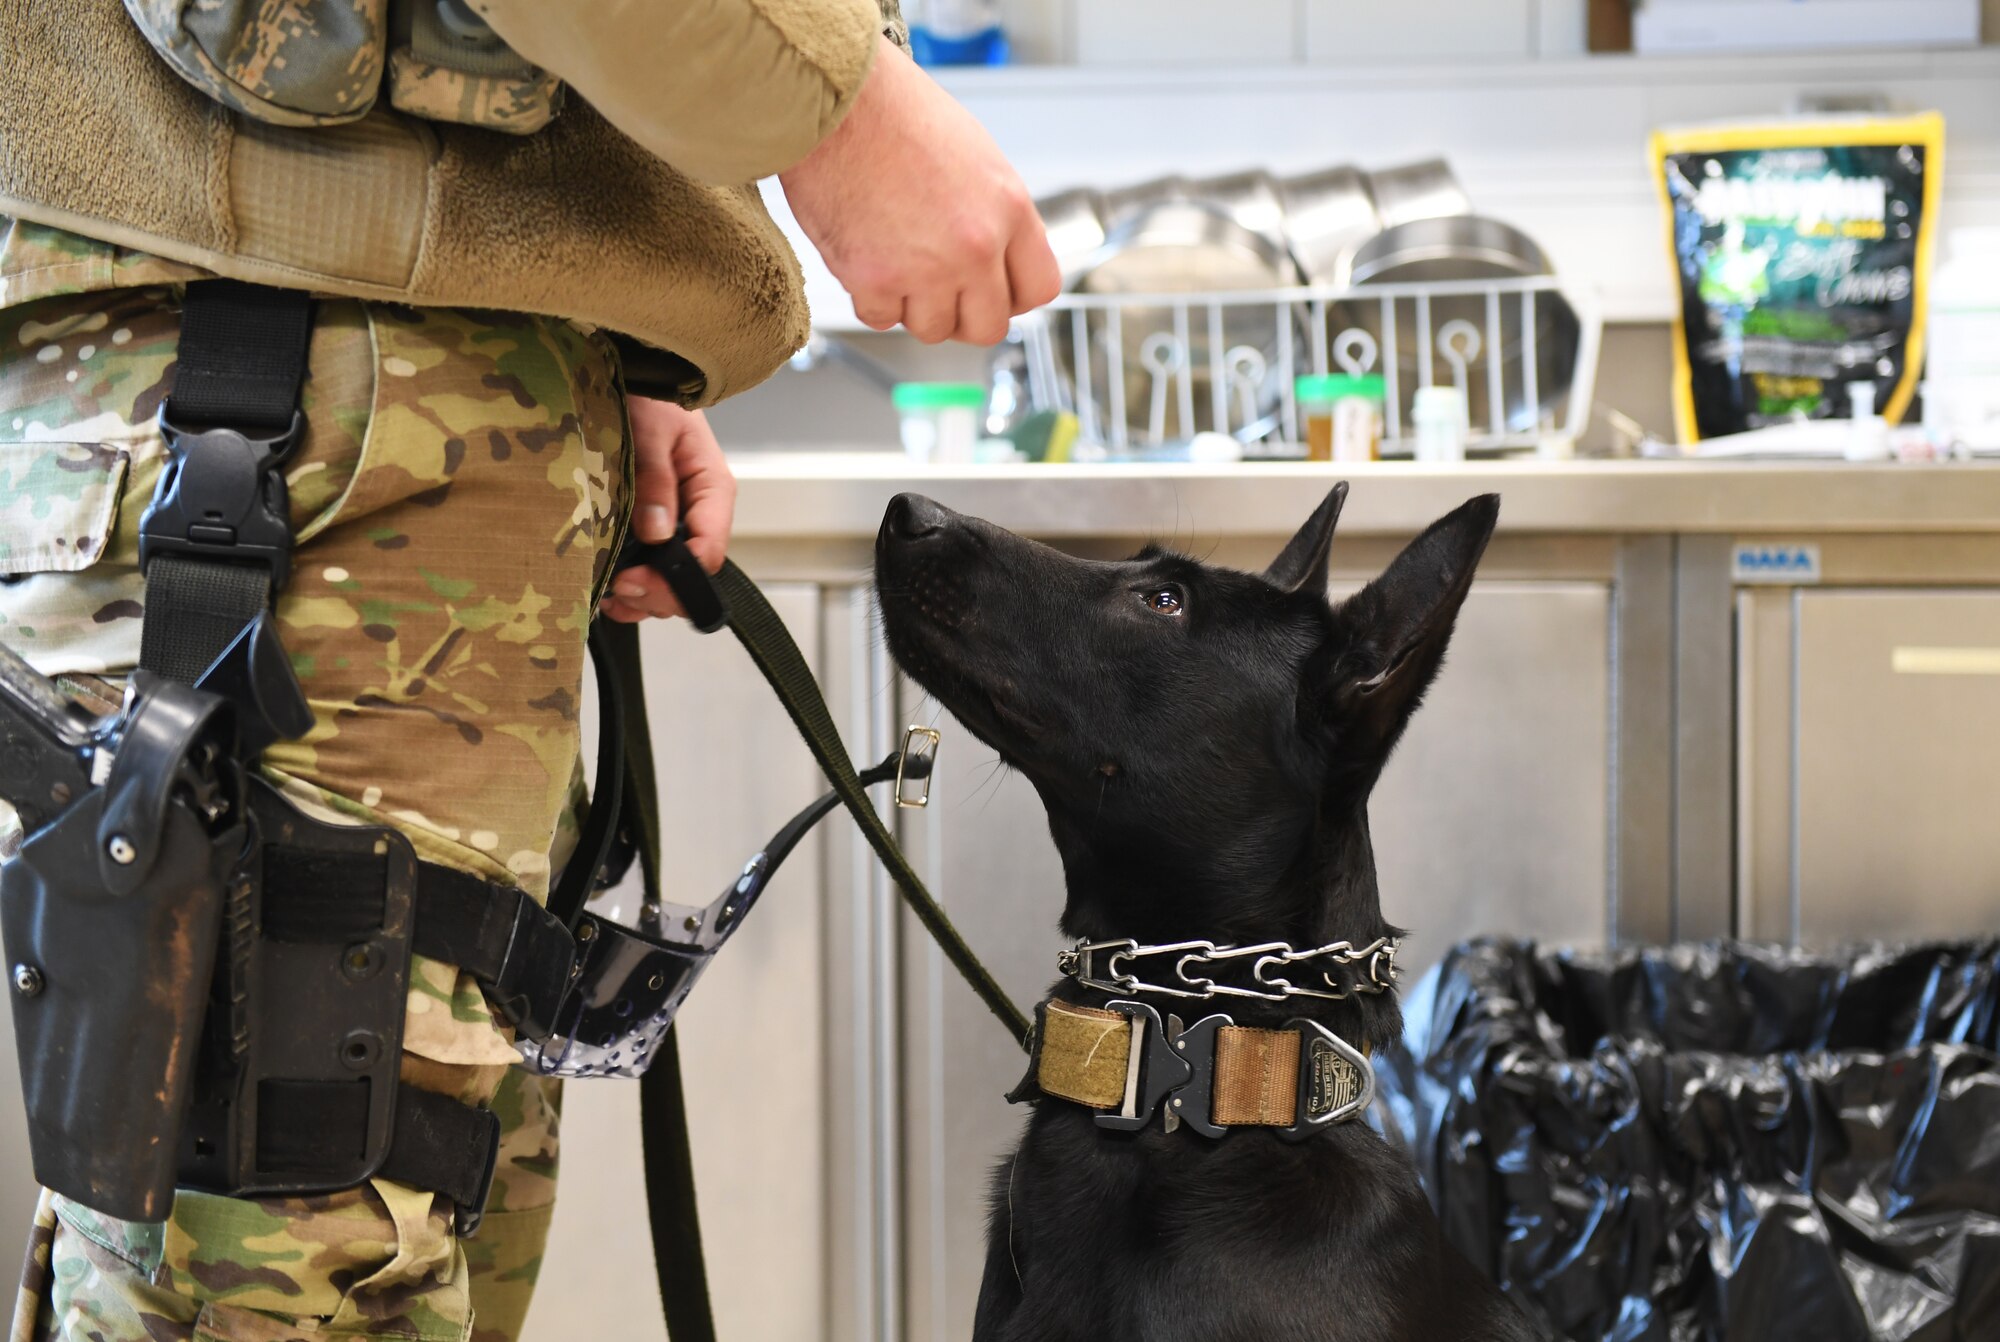 Ccatalina, 52nd Security Forces Squadron military working dog, sits for a treat during a medical exam at Spangdahlem Air Base, Germany, Mar. 5, 2020. Each month the MWDs are given heartworm prevention in the form of a treat, making it easier for the dog to receive the medication. (U.S. Air Force photo by Airman 1st Class Alison Stewart)